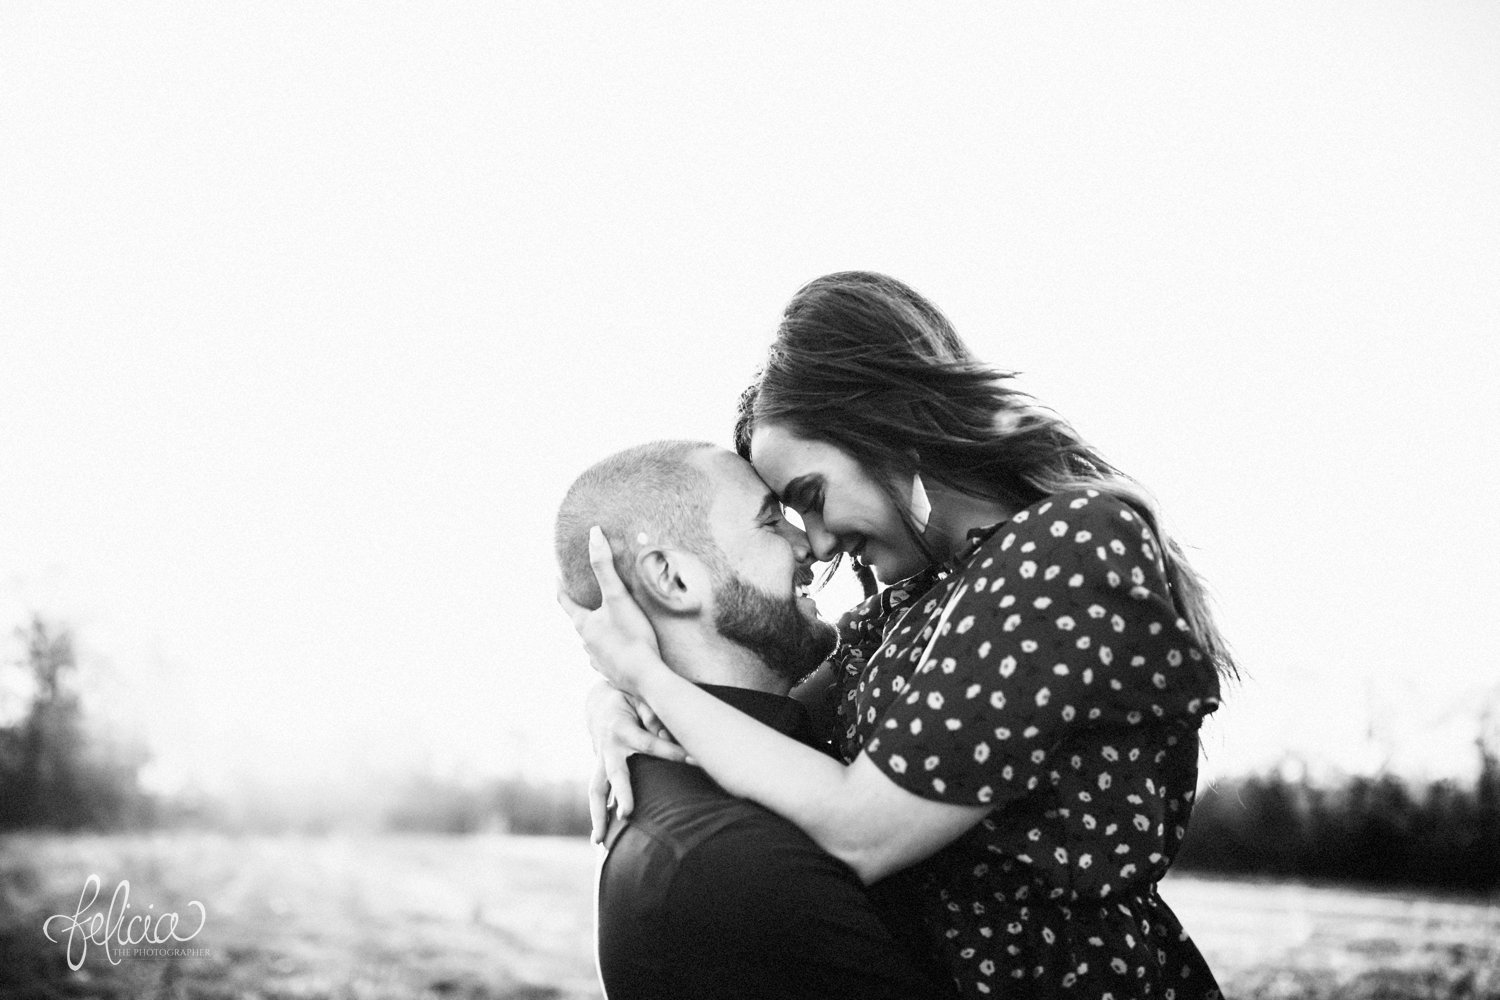 images by feliciathephotographer.com | Burr Oak Woods | engagement photos | wedding photographer | engagement photographer | field | sunrise | picked up | posing | posed | black and white | b&w | love | smiles | happiness | happy | floral dress | beard | 